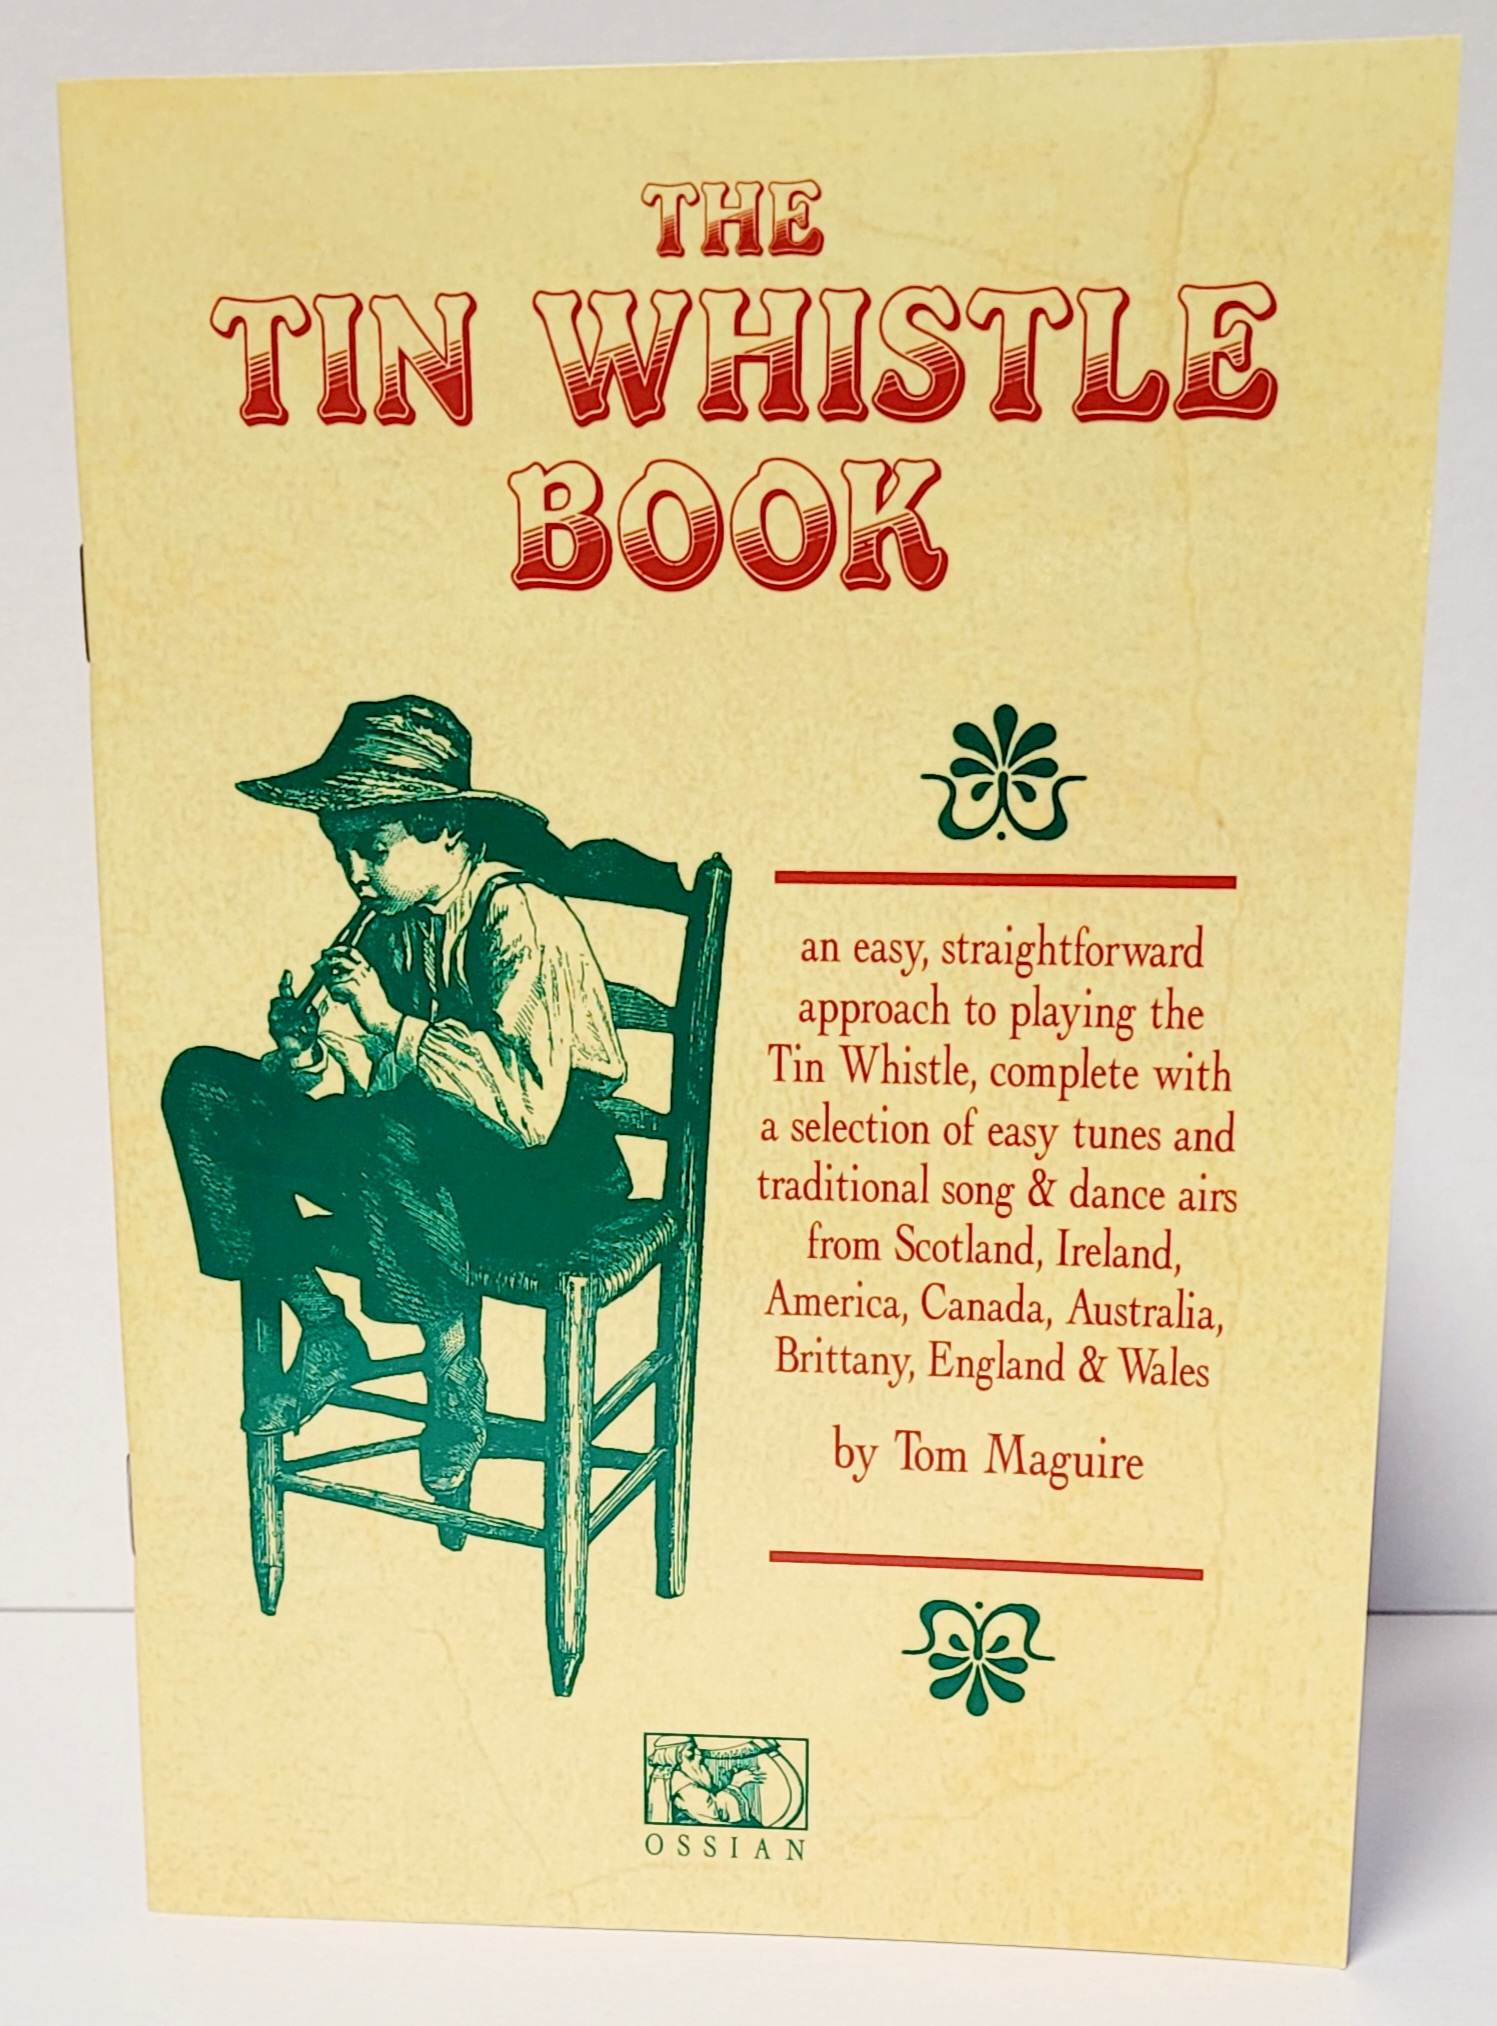 The Tin Whistle Book by Tom Maguire